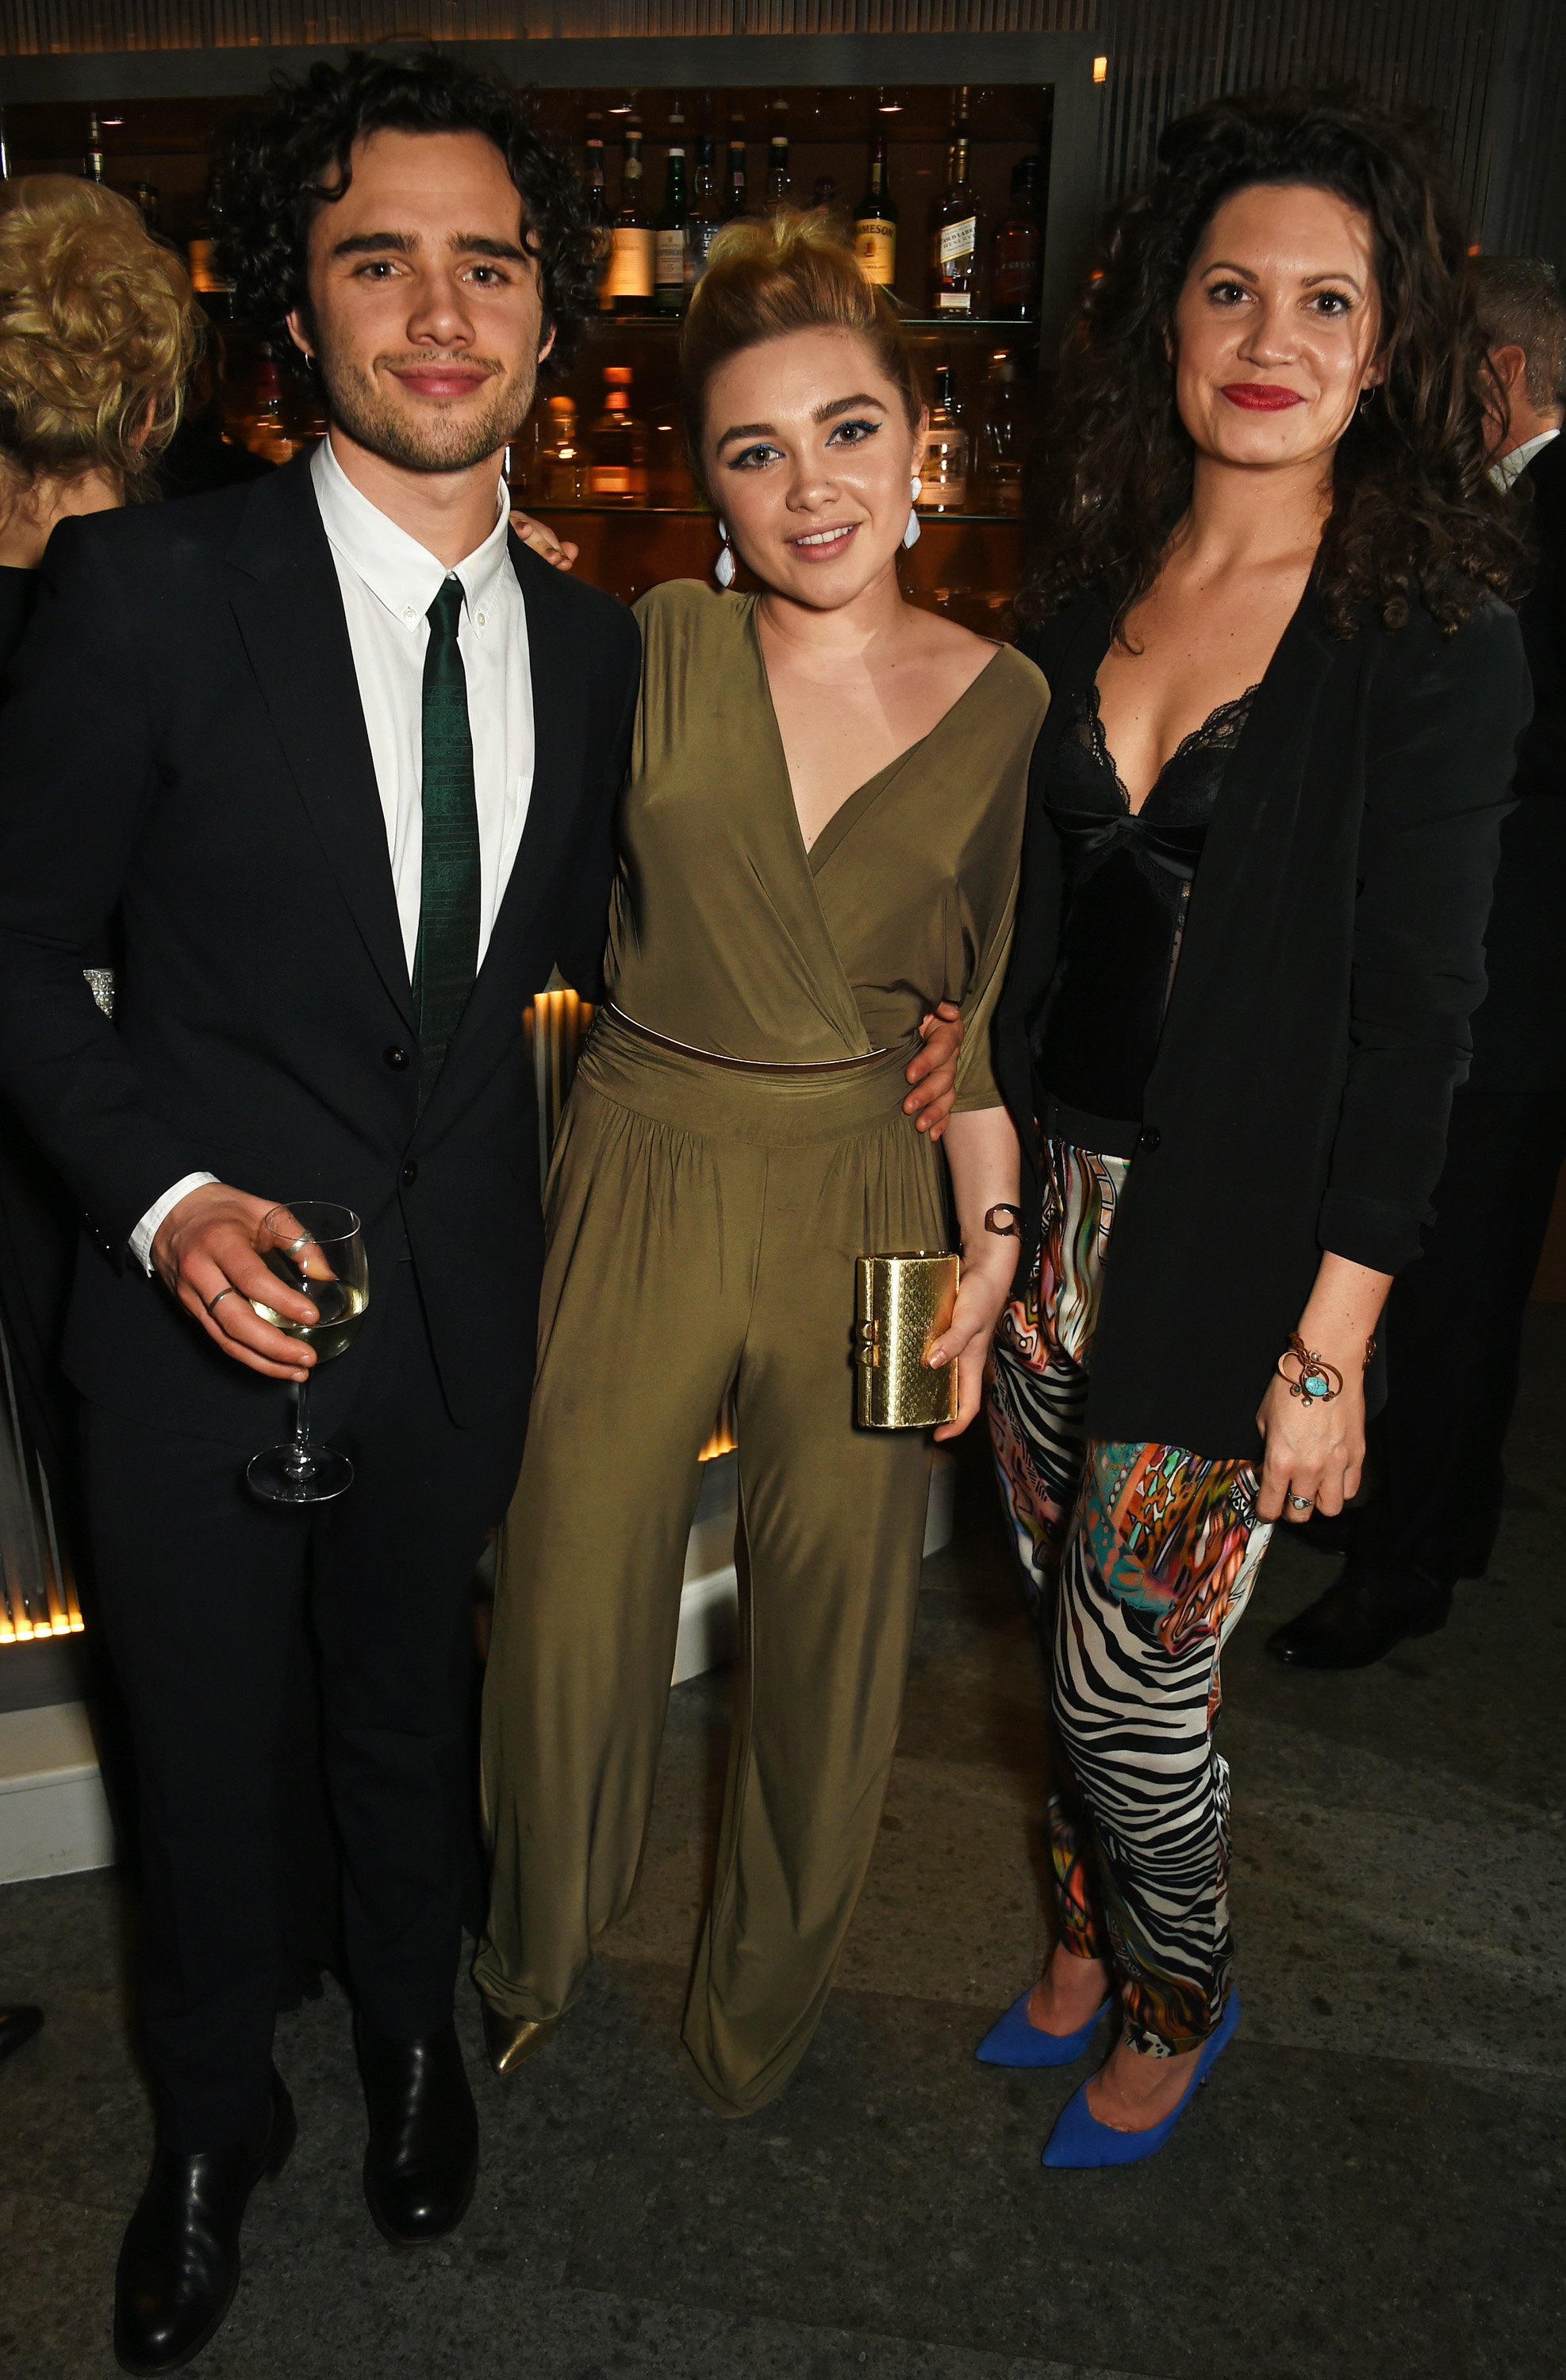 Toby Sebastian, Florence Pugh, and Arabella Gibbins attend the London Critics' Circle Film Awards after party on January 17, 2016, in London, England. | Source: Getty Images